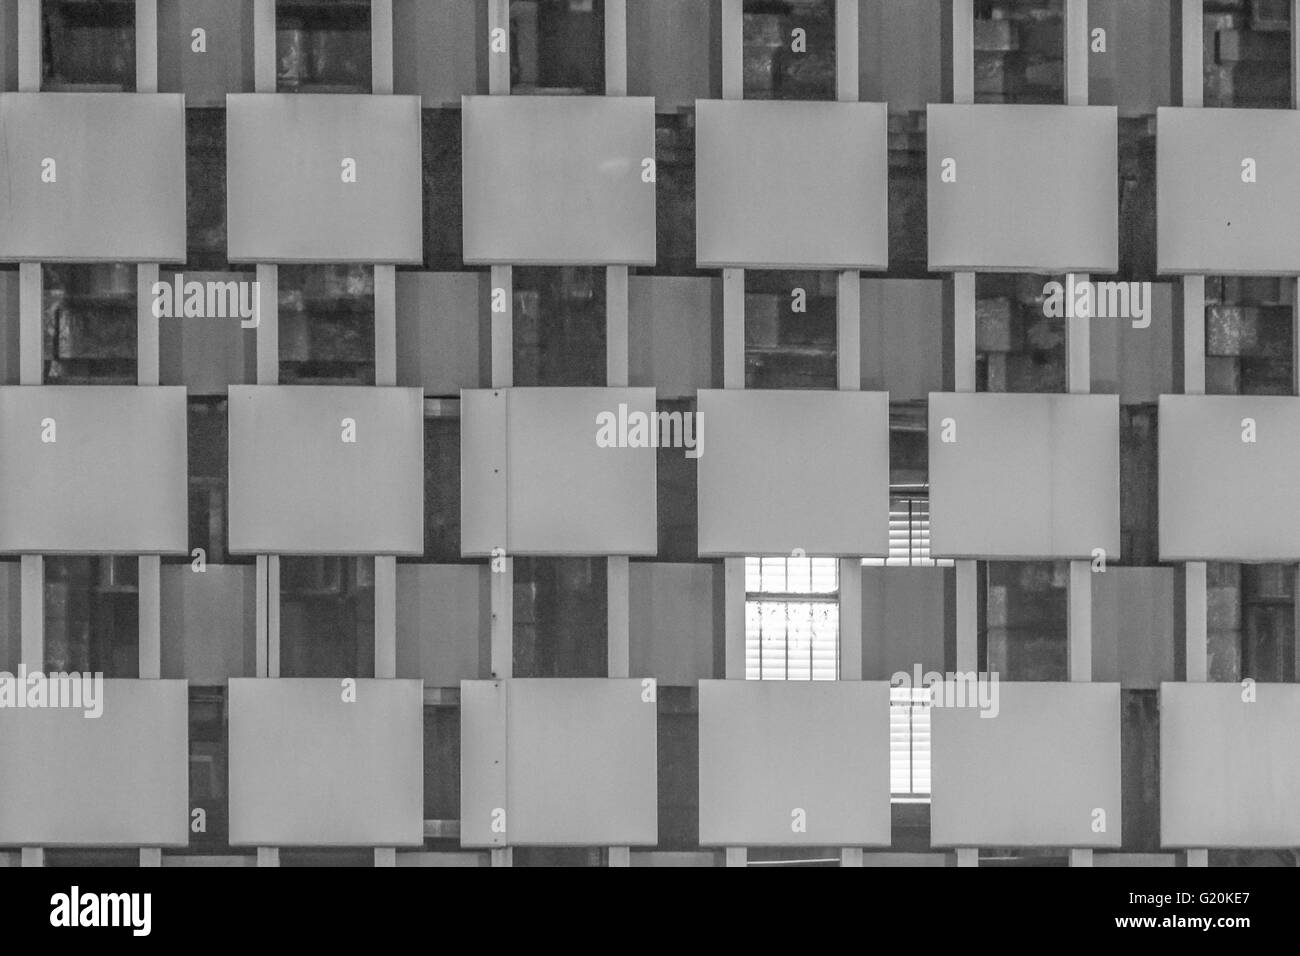 black and white image of the facade of a building that has a grid like pattern in New Orleans, LA Stock Photo